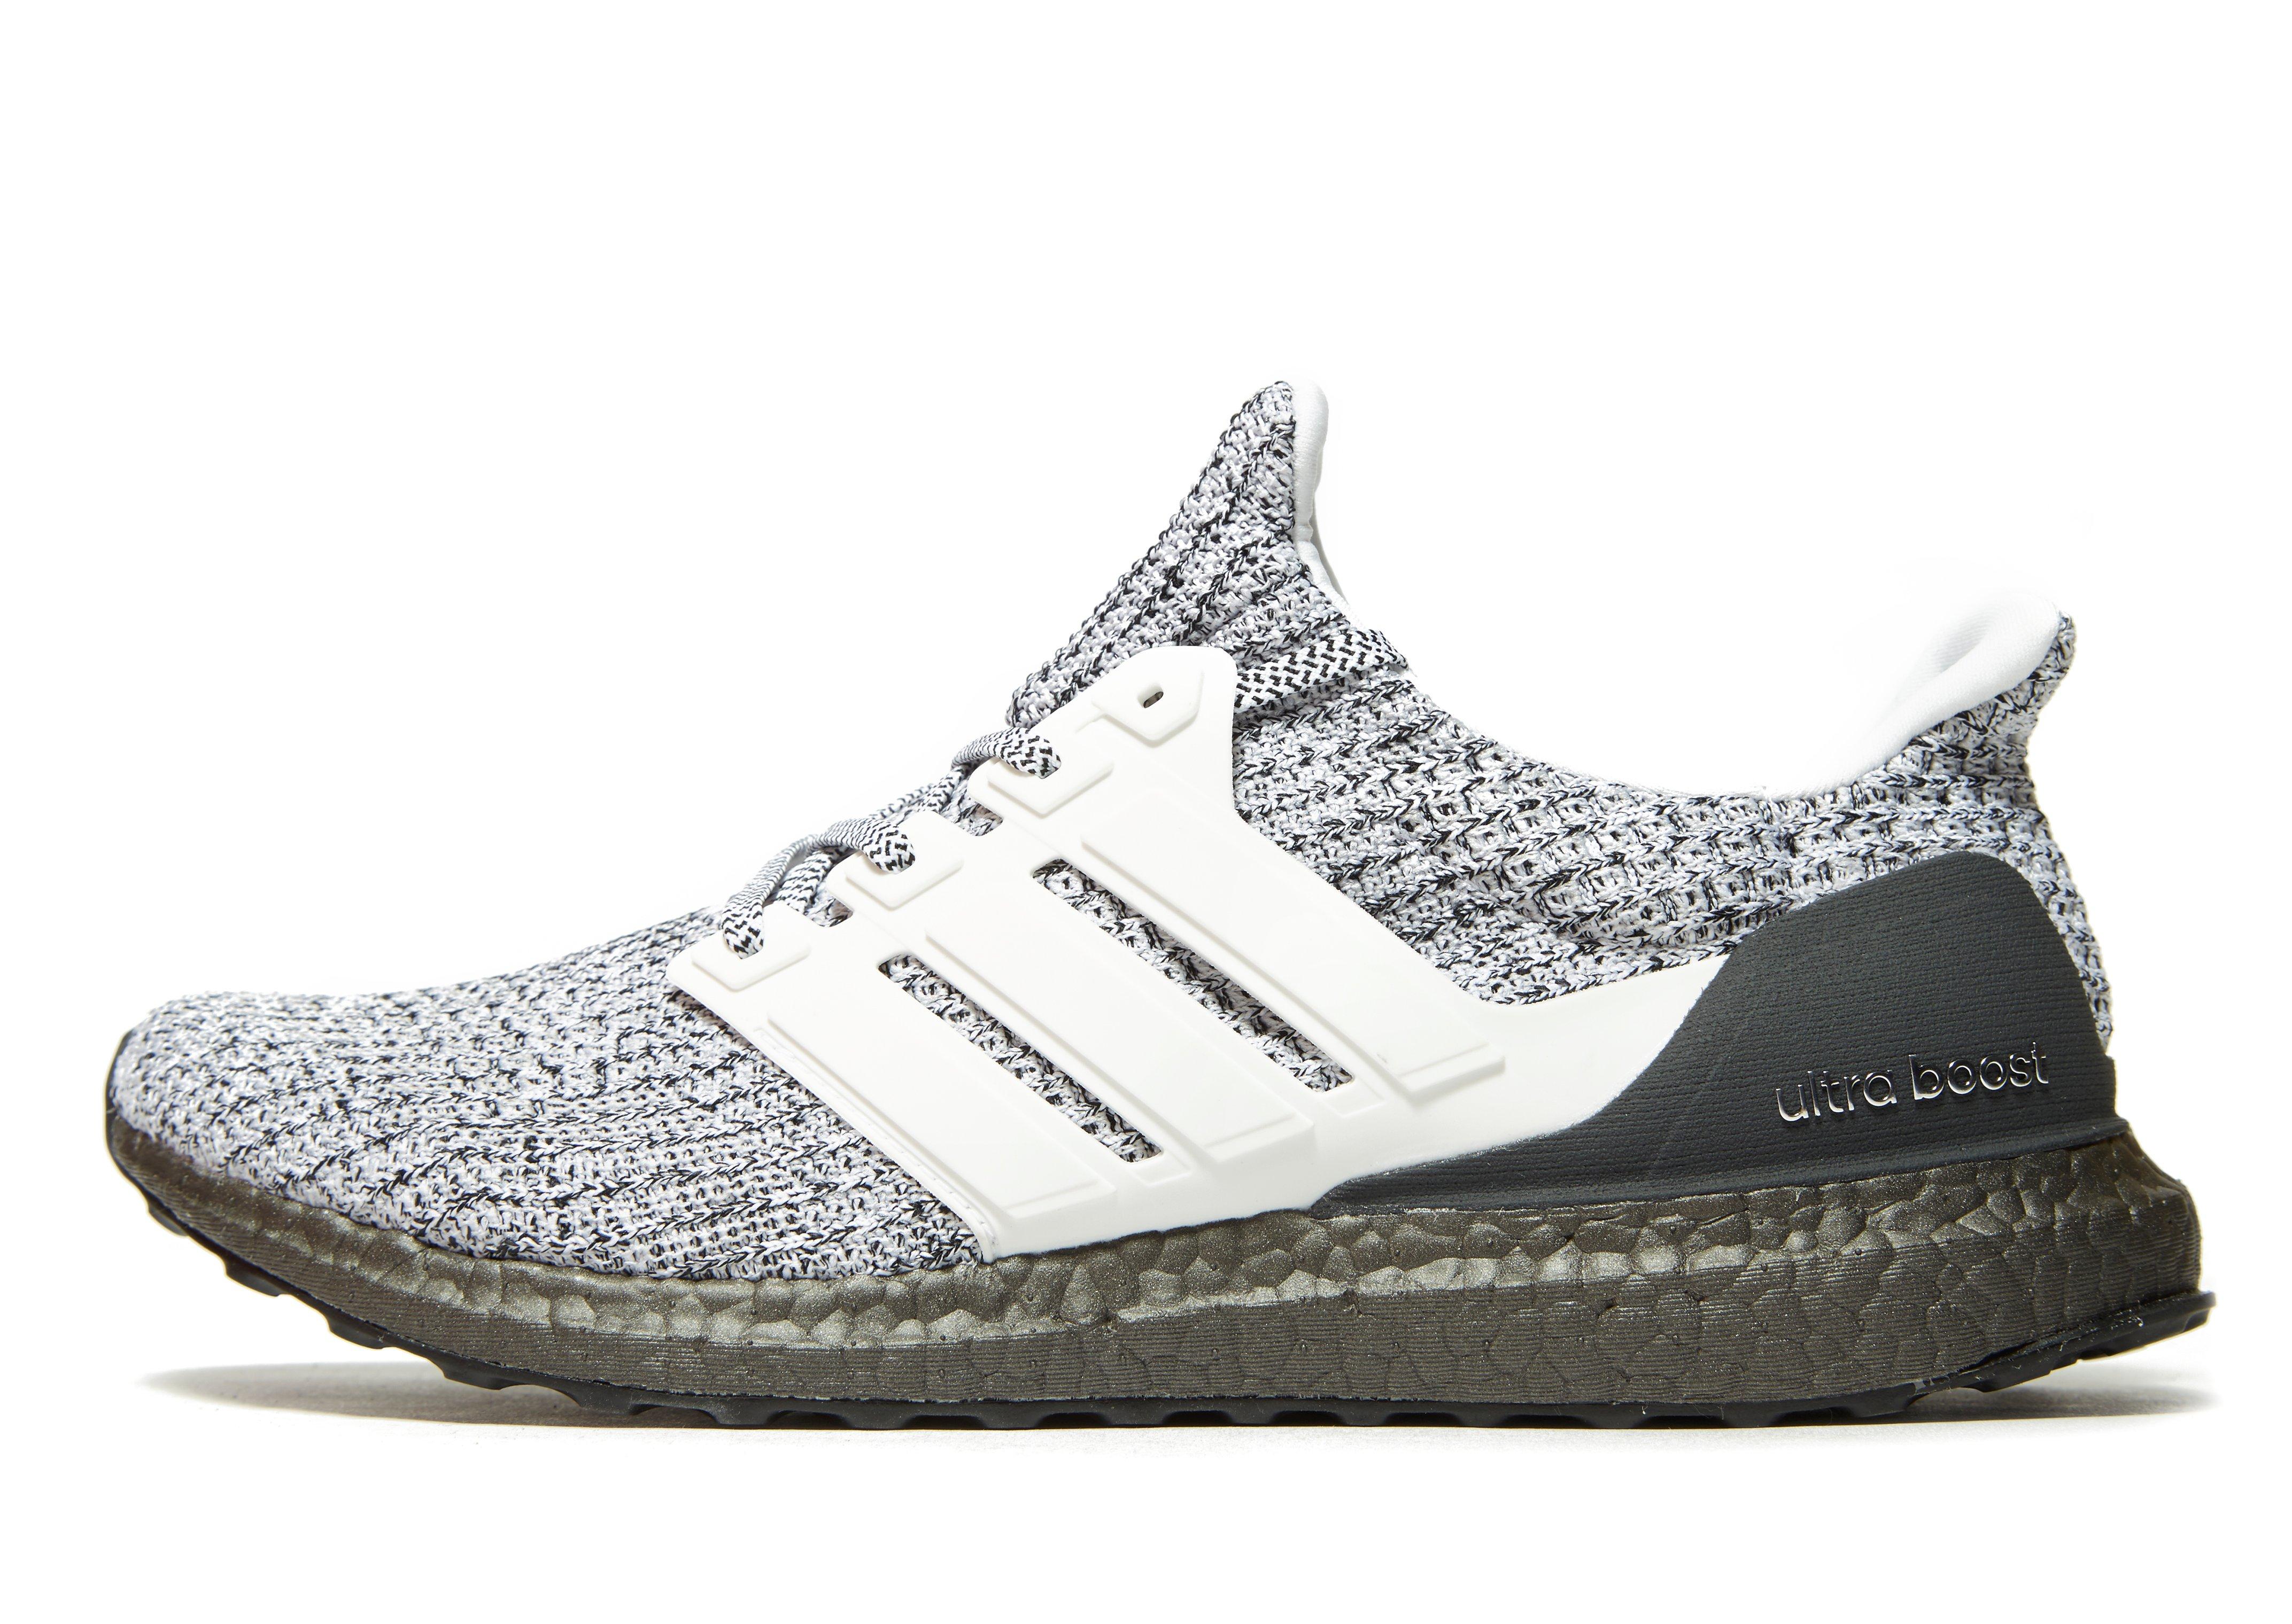 adidas ultra boost cookies and cream 4.0